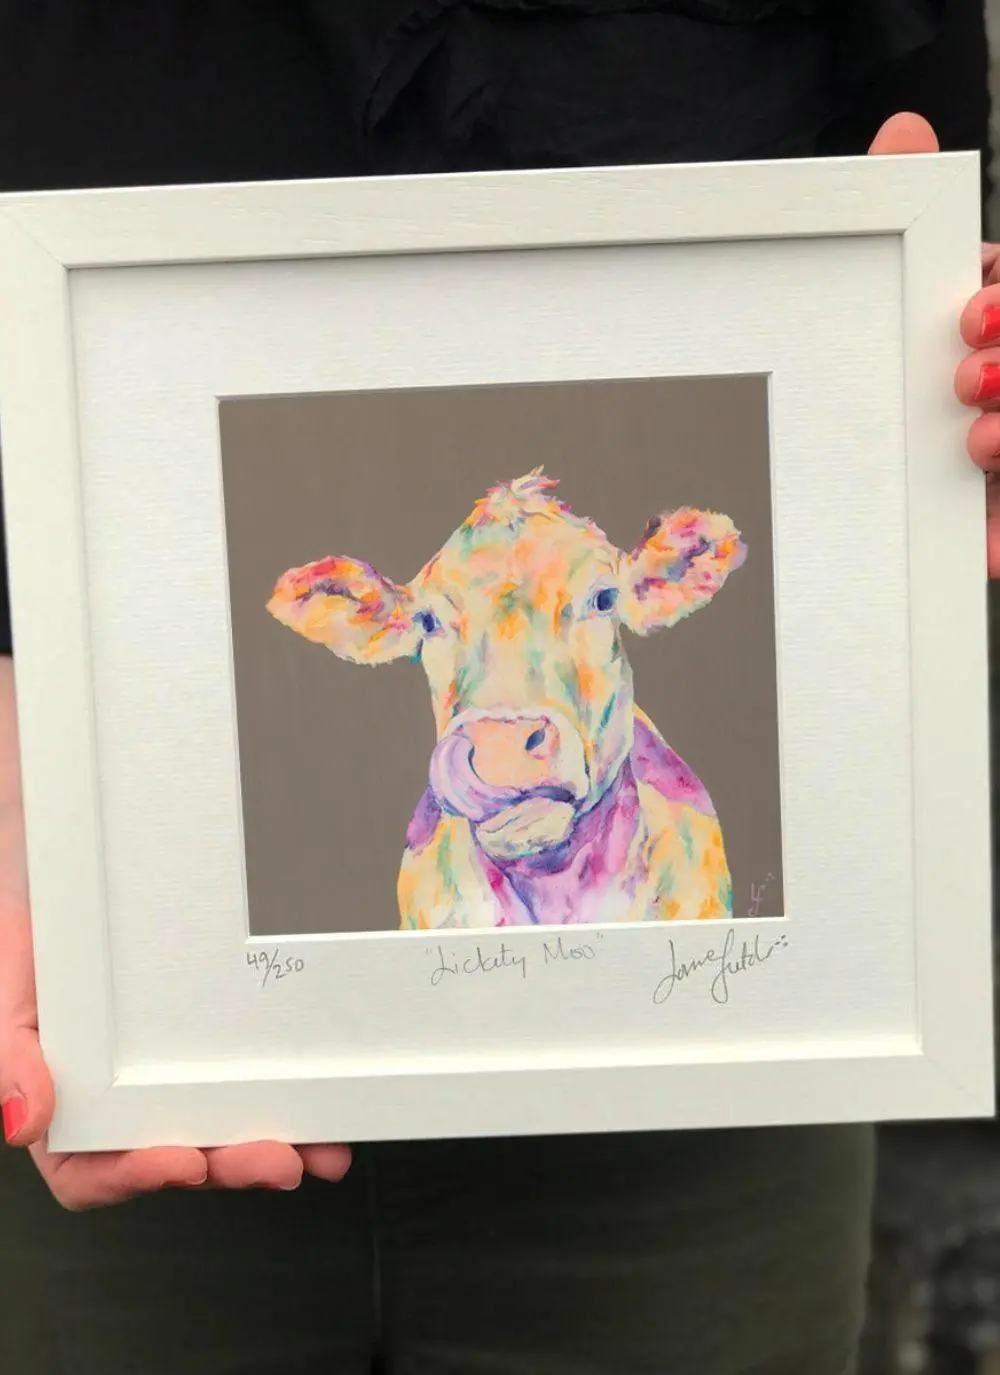 Lickity Moo Framed Print (10 x 10 inches)